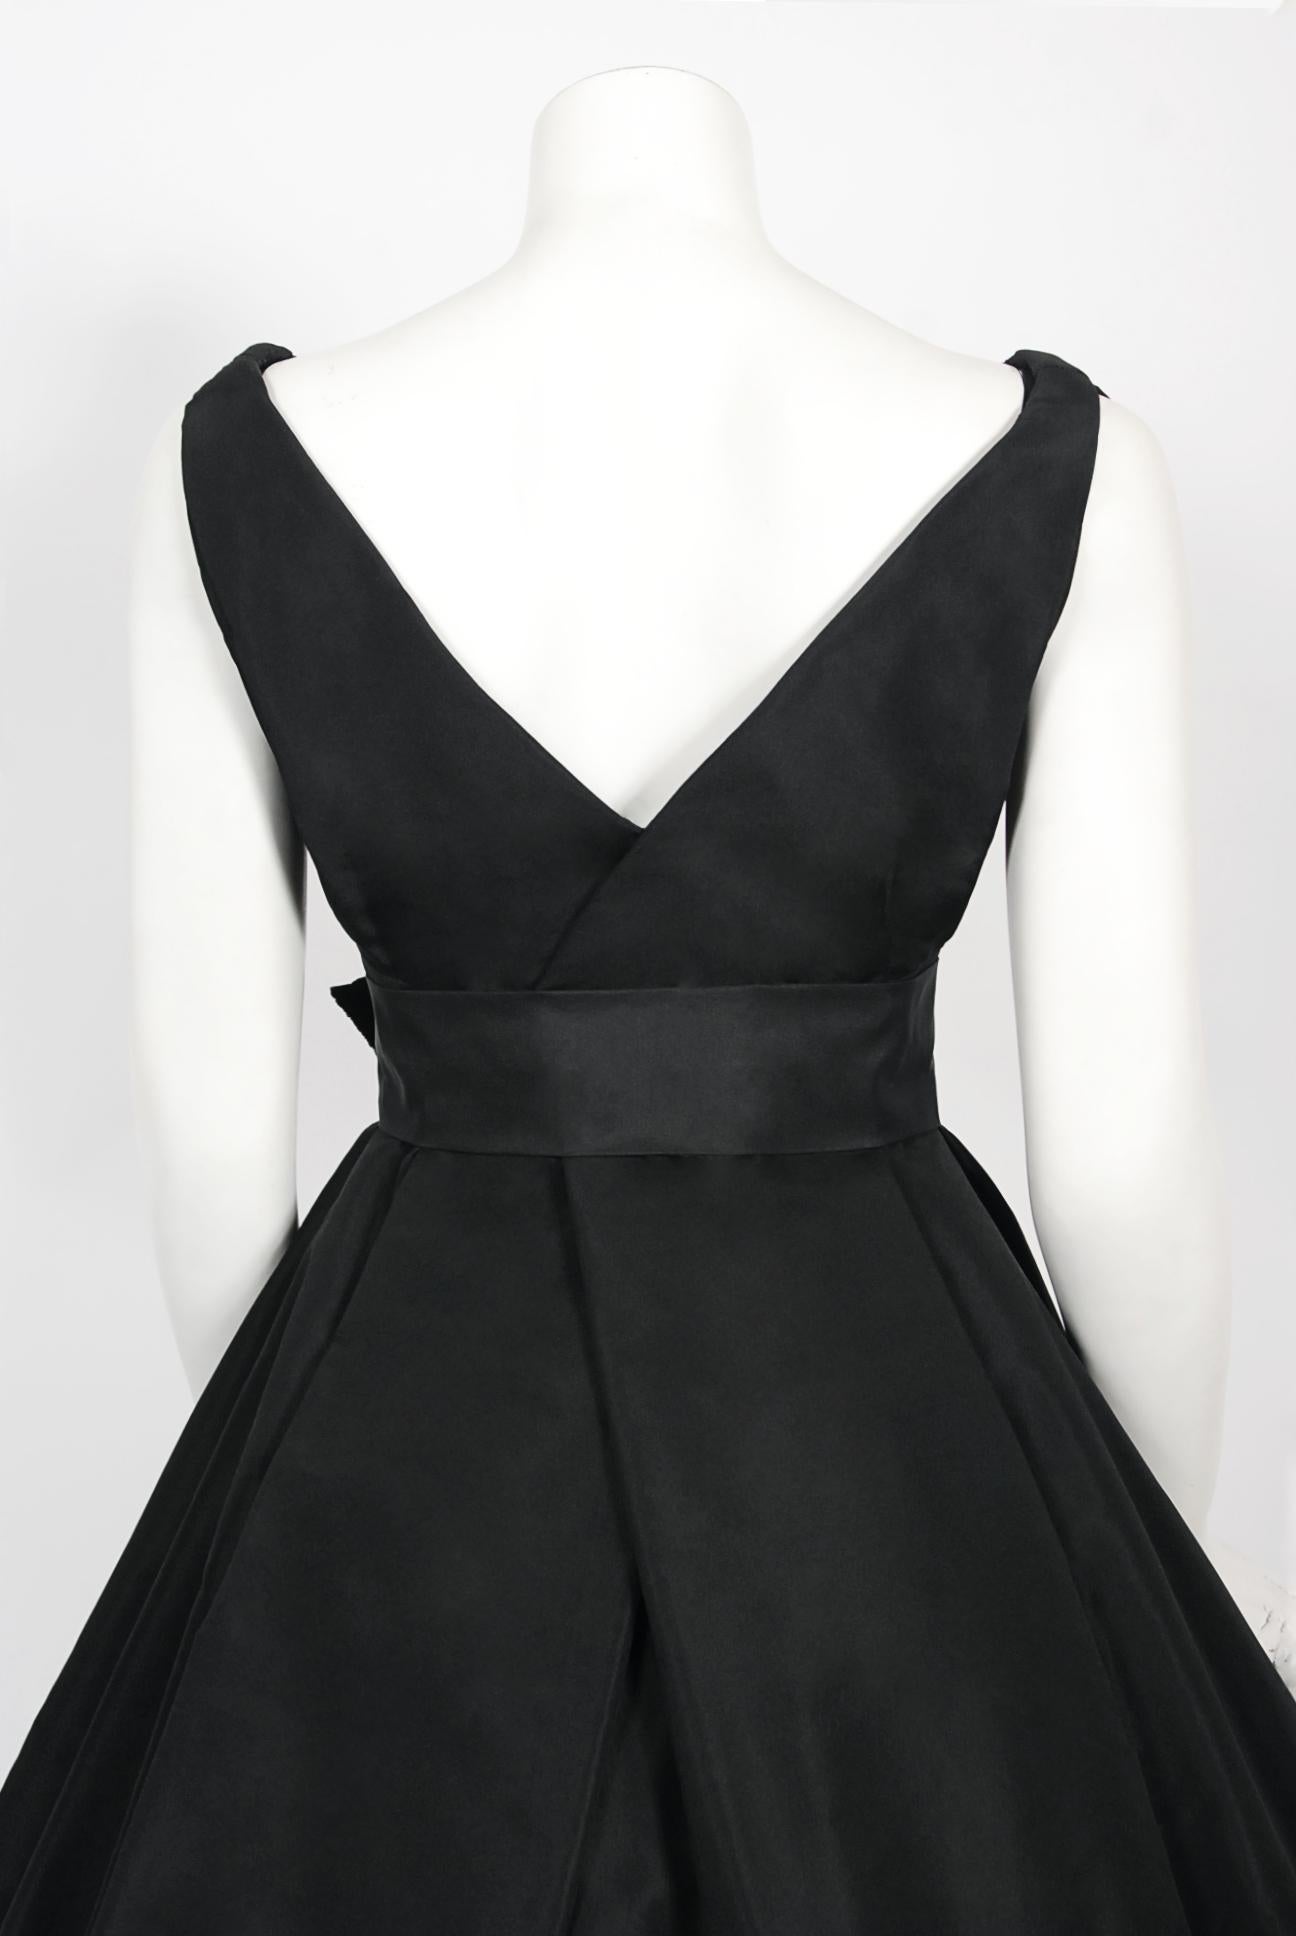 Vintage 1956 Christian Dior Haute Couture Documented Black Silk 'New Look' Dress 10